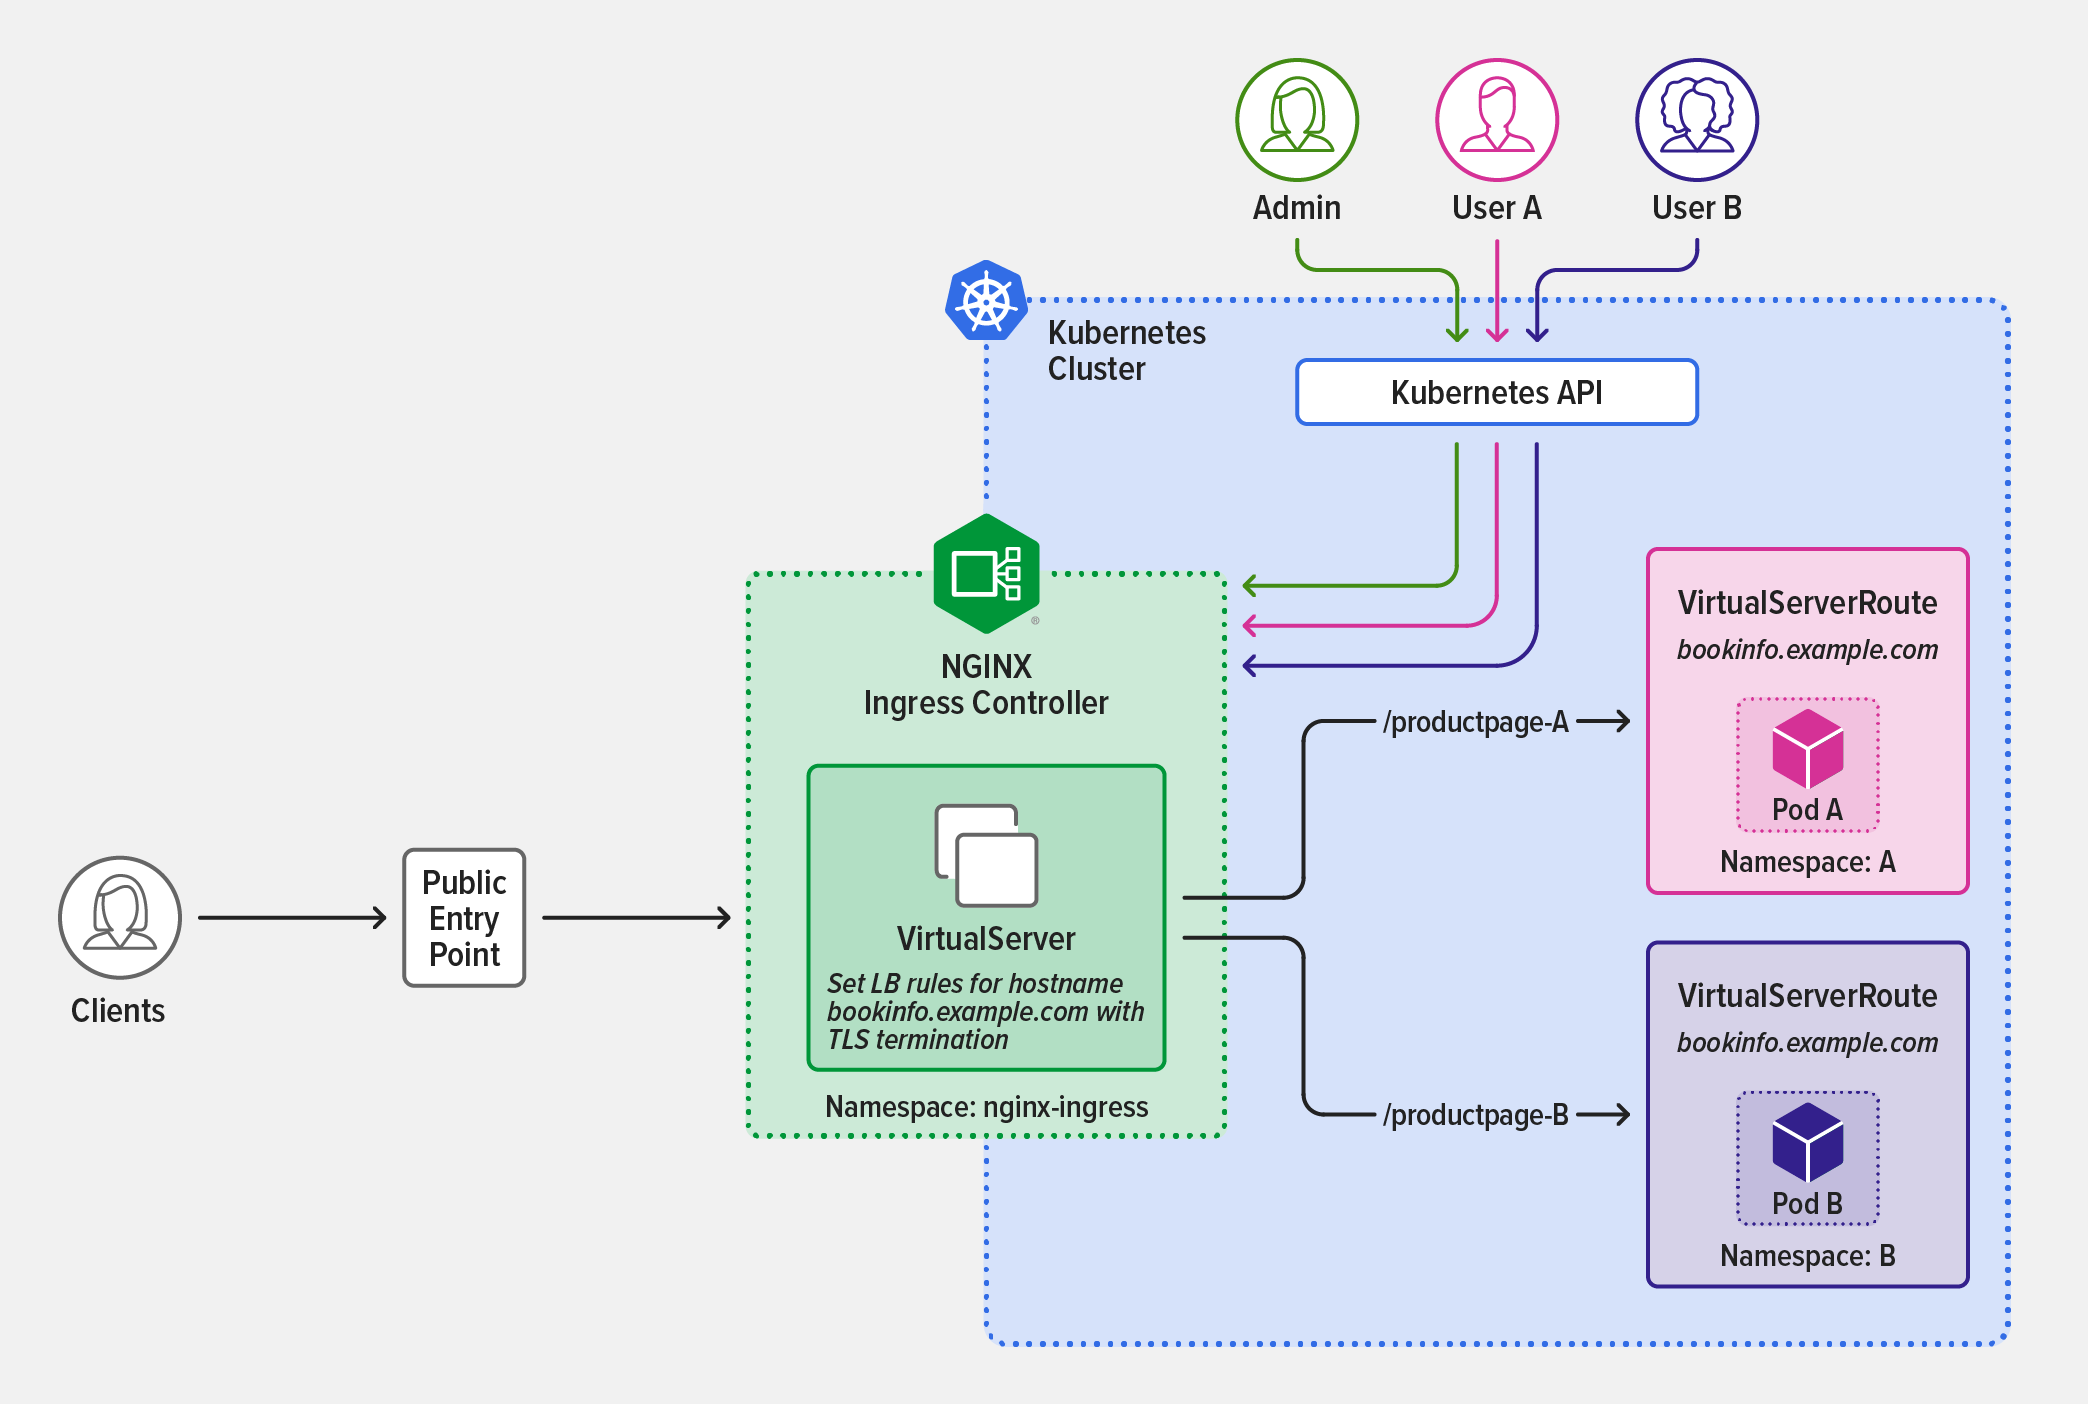 Topology diagram of restricted self-service in a Kubernetes cluster, where administrators configure VirtualServer resources, but delegate configuration of the applications to dev teams, which use VirtualServerRoute resources to define traffic rules and expose application subroutes